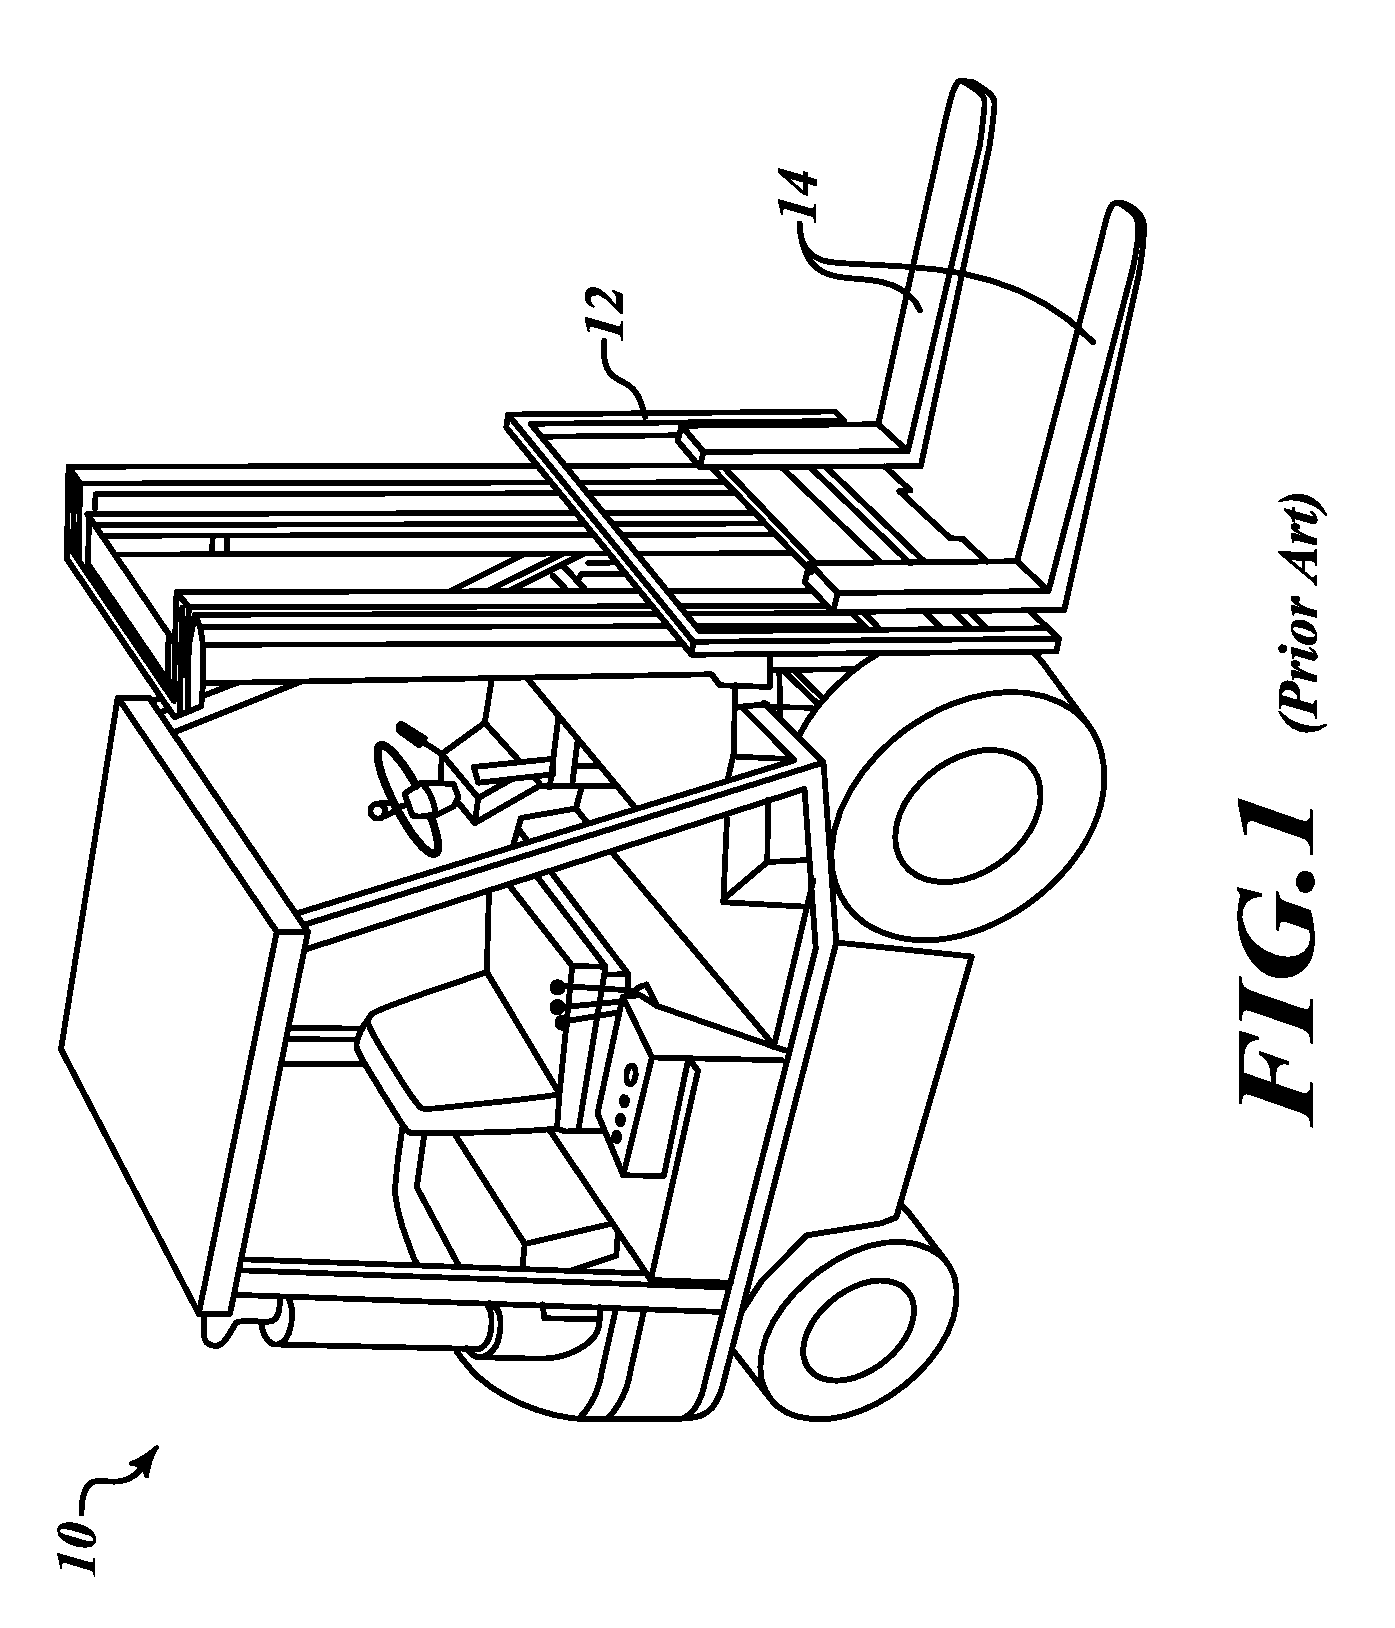 Forklift scale, load cell thereof and method of measuring a forklift load